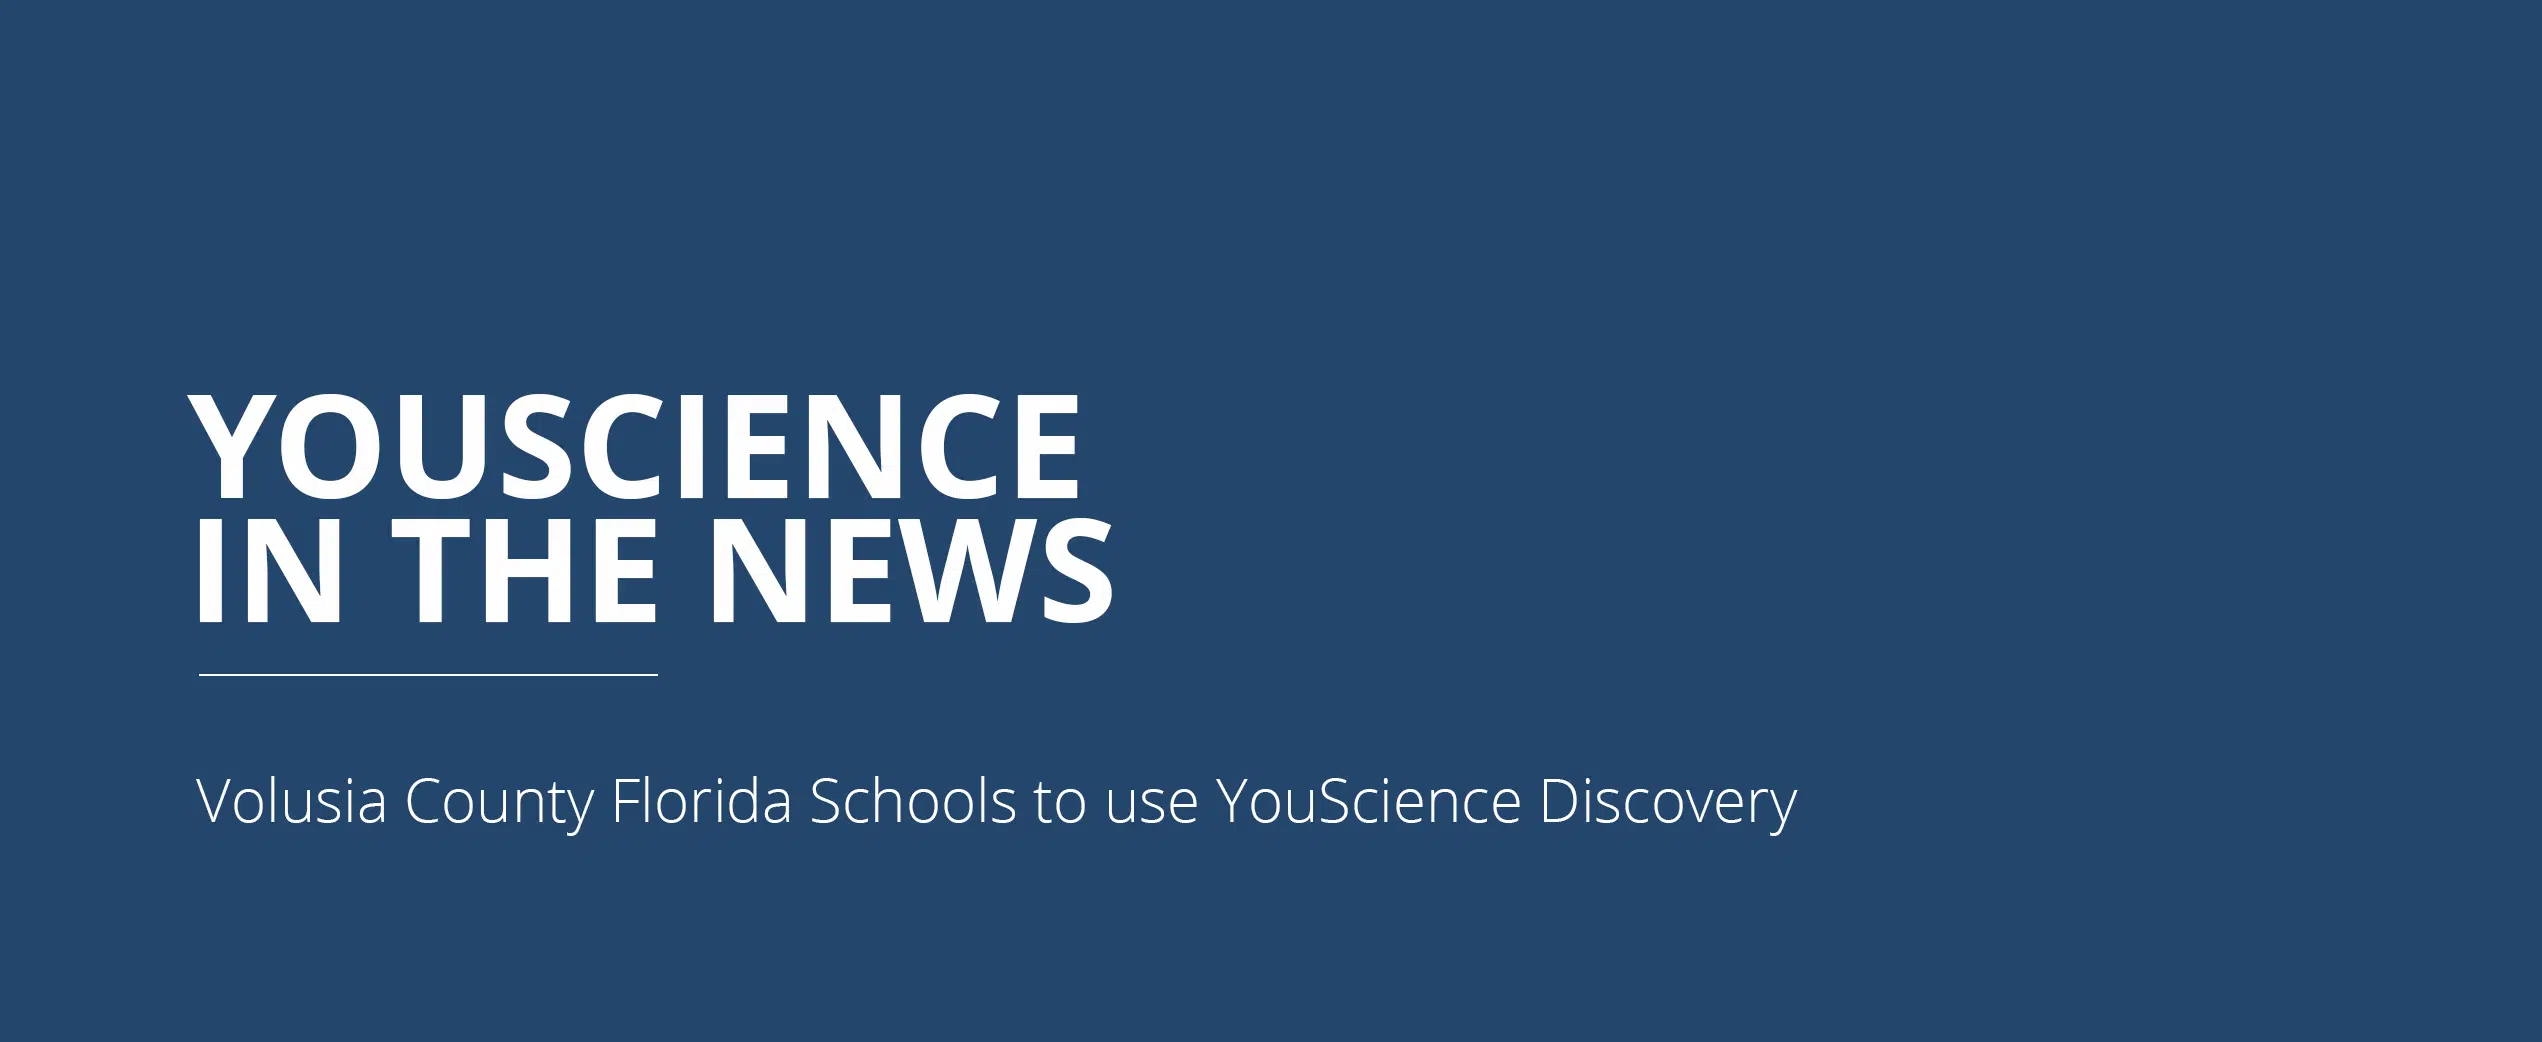 Daytona Regional Chamber and Volusia County Schools bring YouScience Discovery to local schools